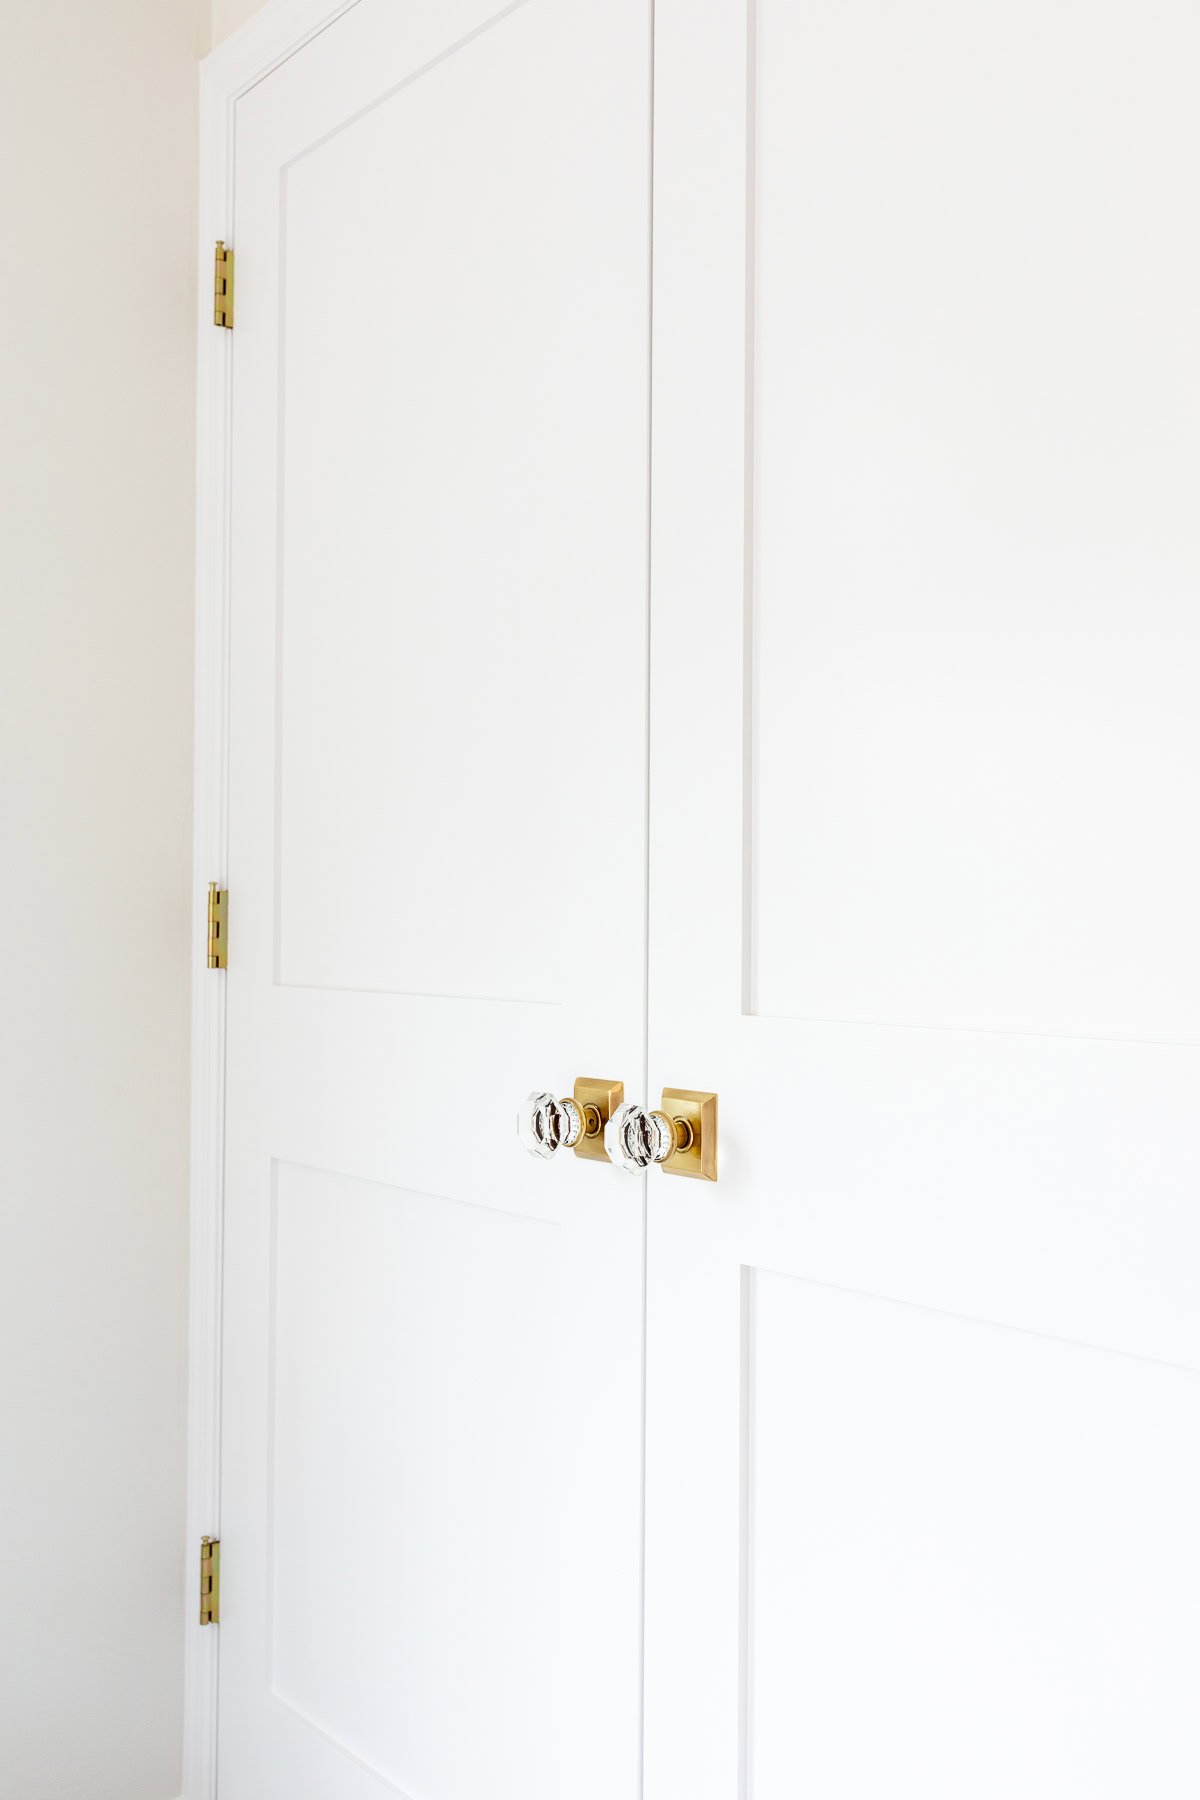 White double doors with brass door knobs on a clean, white wall.